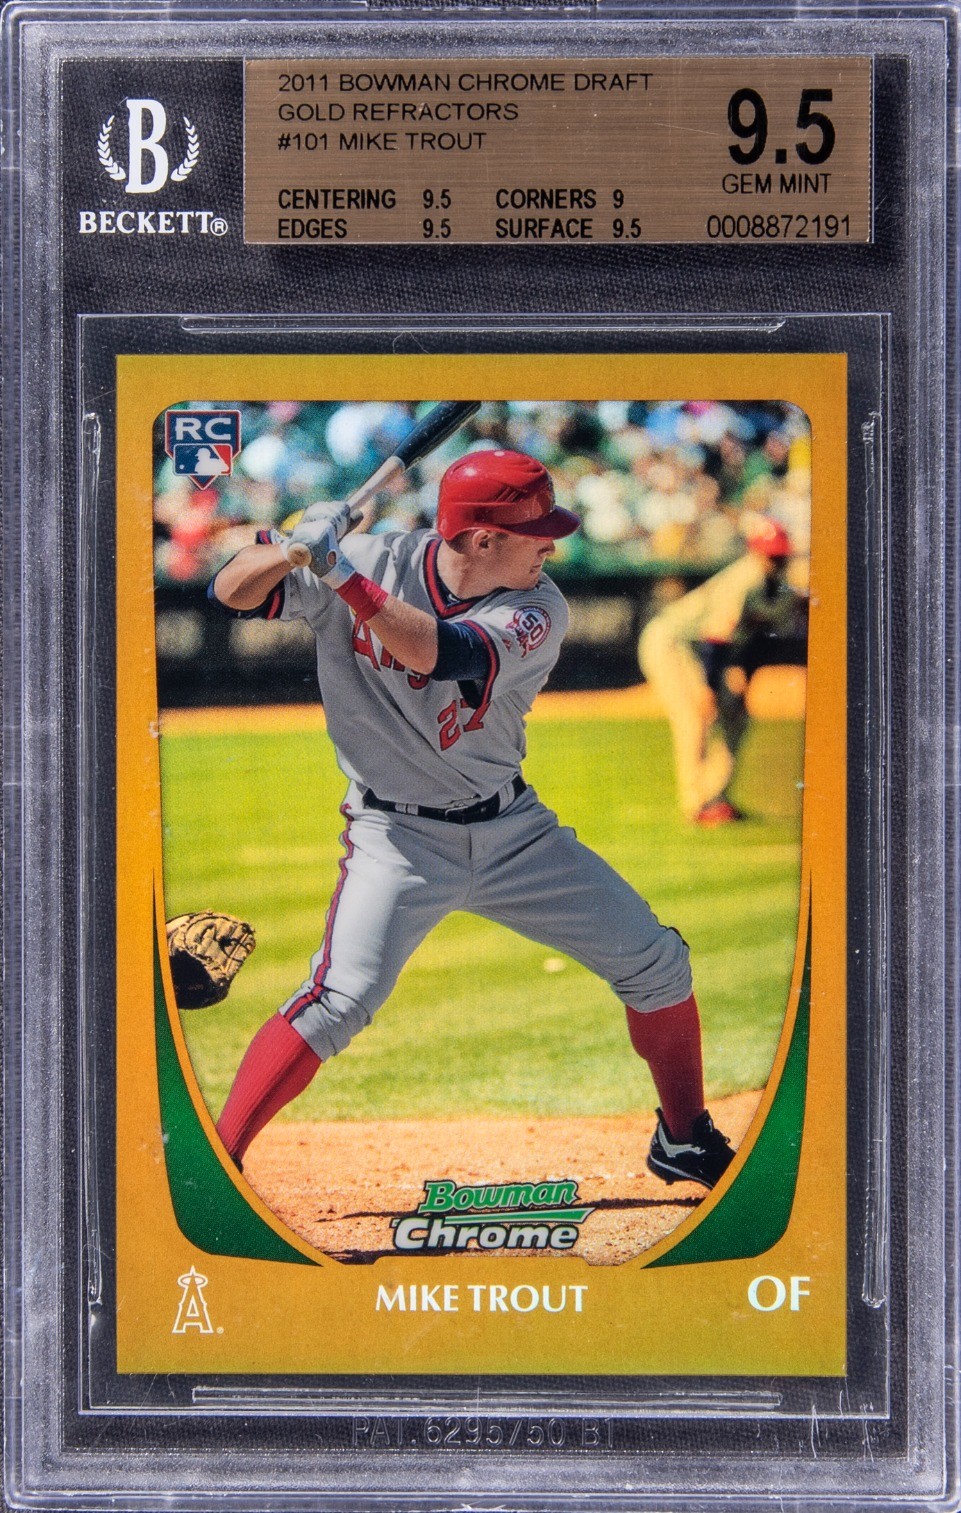 2011 Bowman Chrome Draft Gold Refractor #101 Mike Trout Rookie Card (#26/50) – BGS GEM MINT 9.5